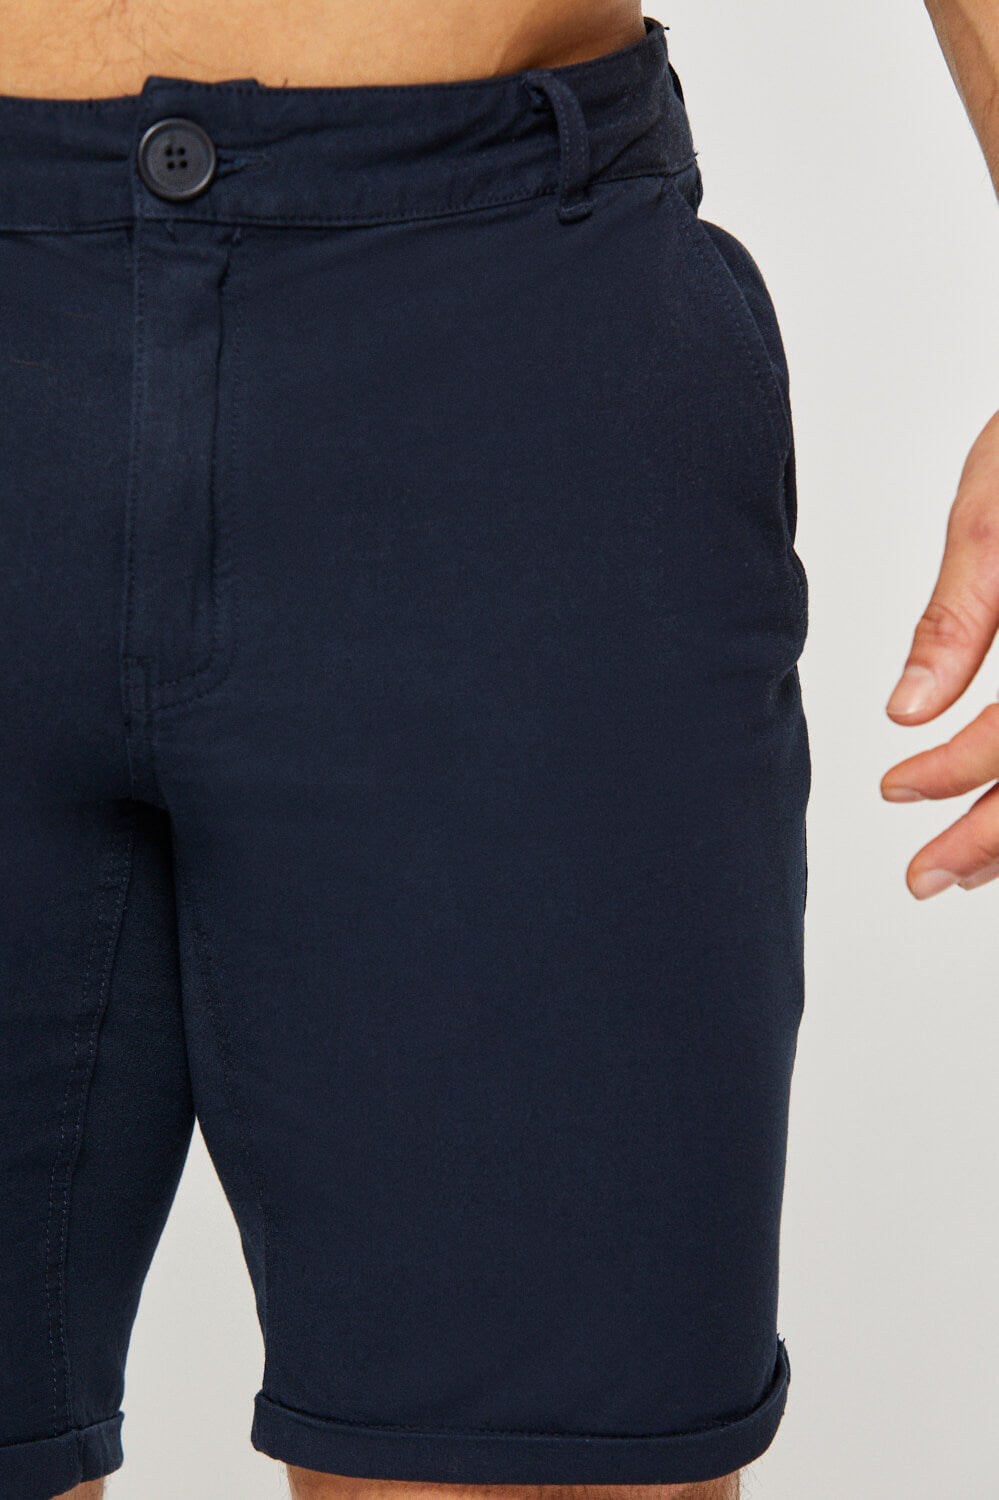 Essential Chino Shorts in TAILORED ATHLETE - Navy - USA